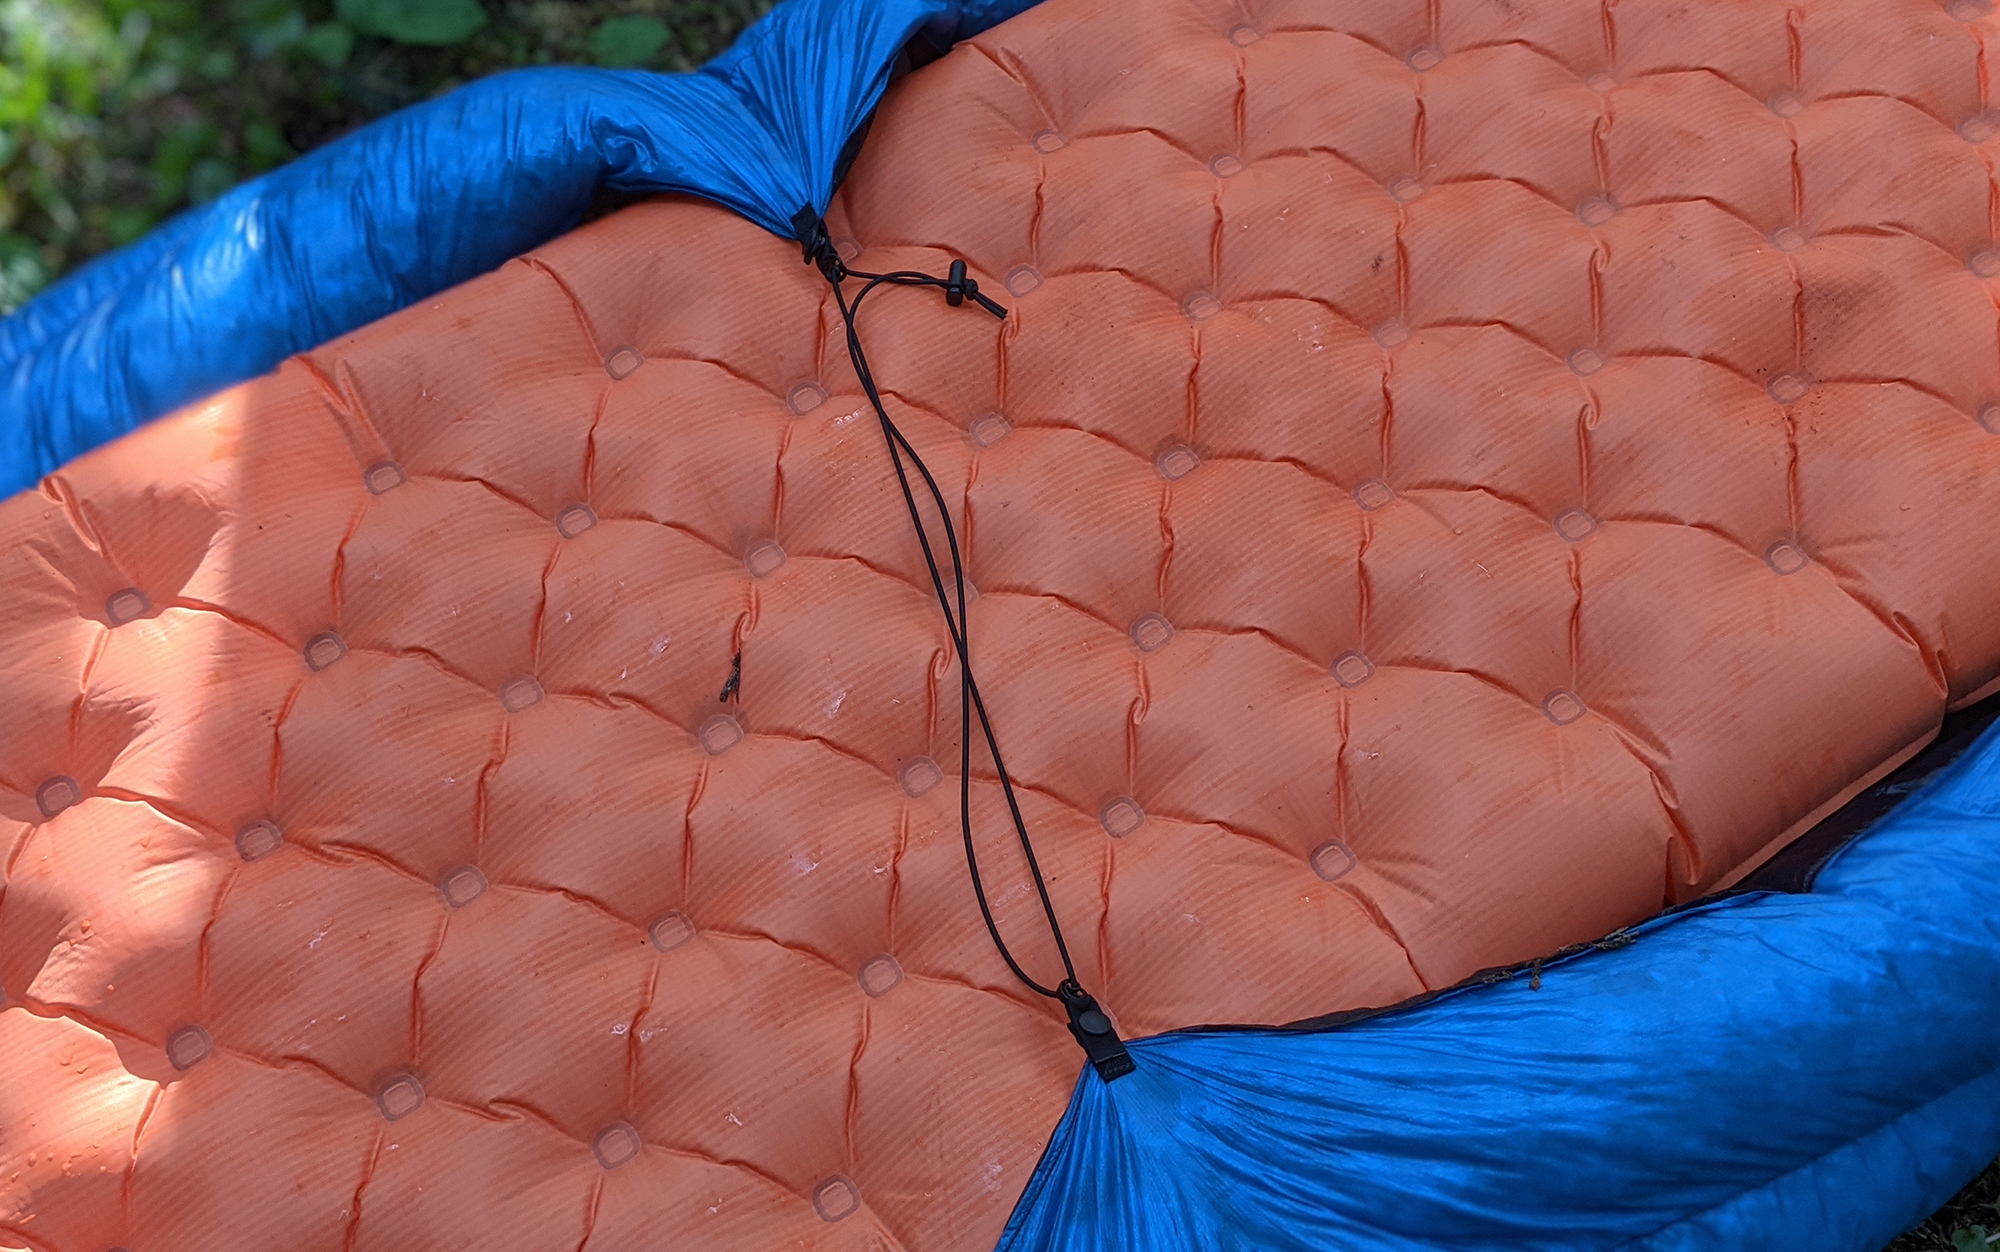 The single underpad strap of the Zpacks Solo Quilt was sufficient to keep out drafts for our experienced quilt users. 